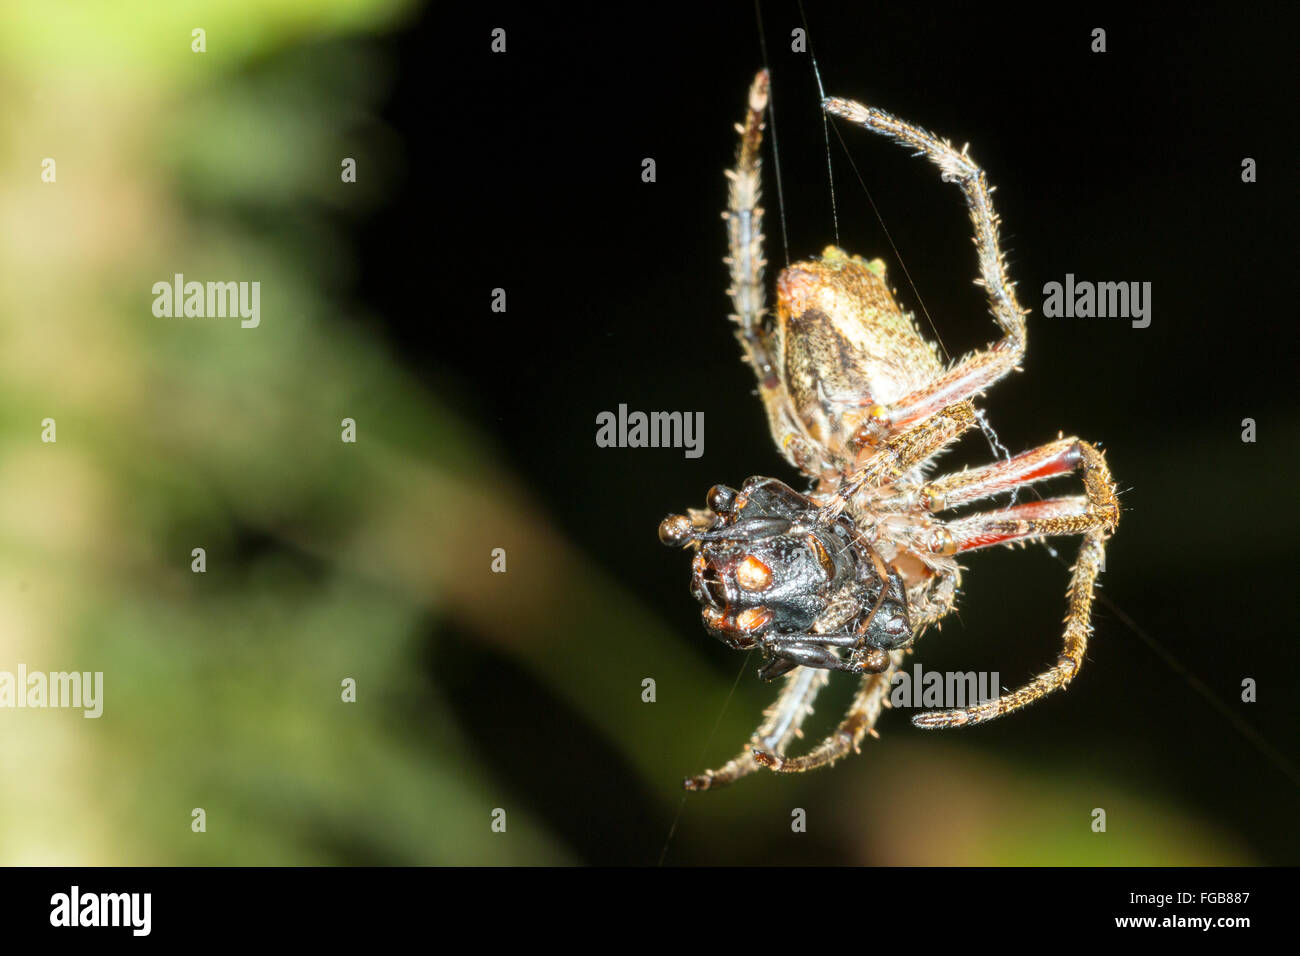 Spider feeding on an insect it has captured in its web. In the rainforest understory, Ecuador Stock Photo